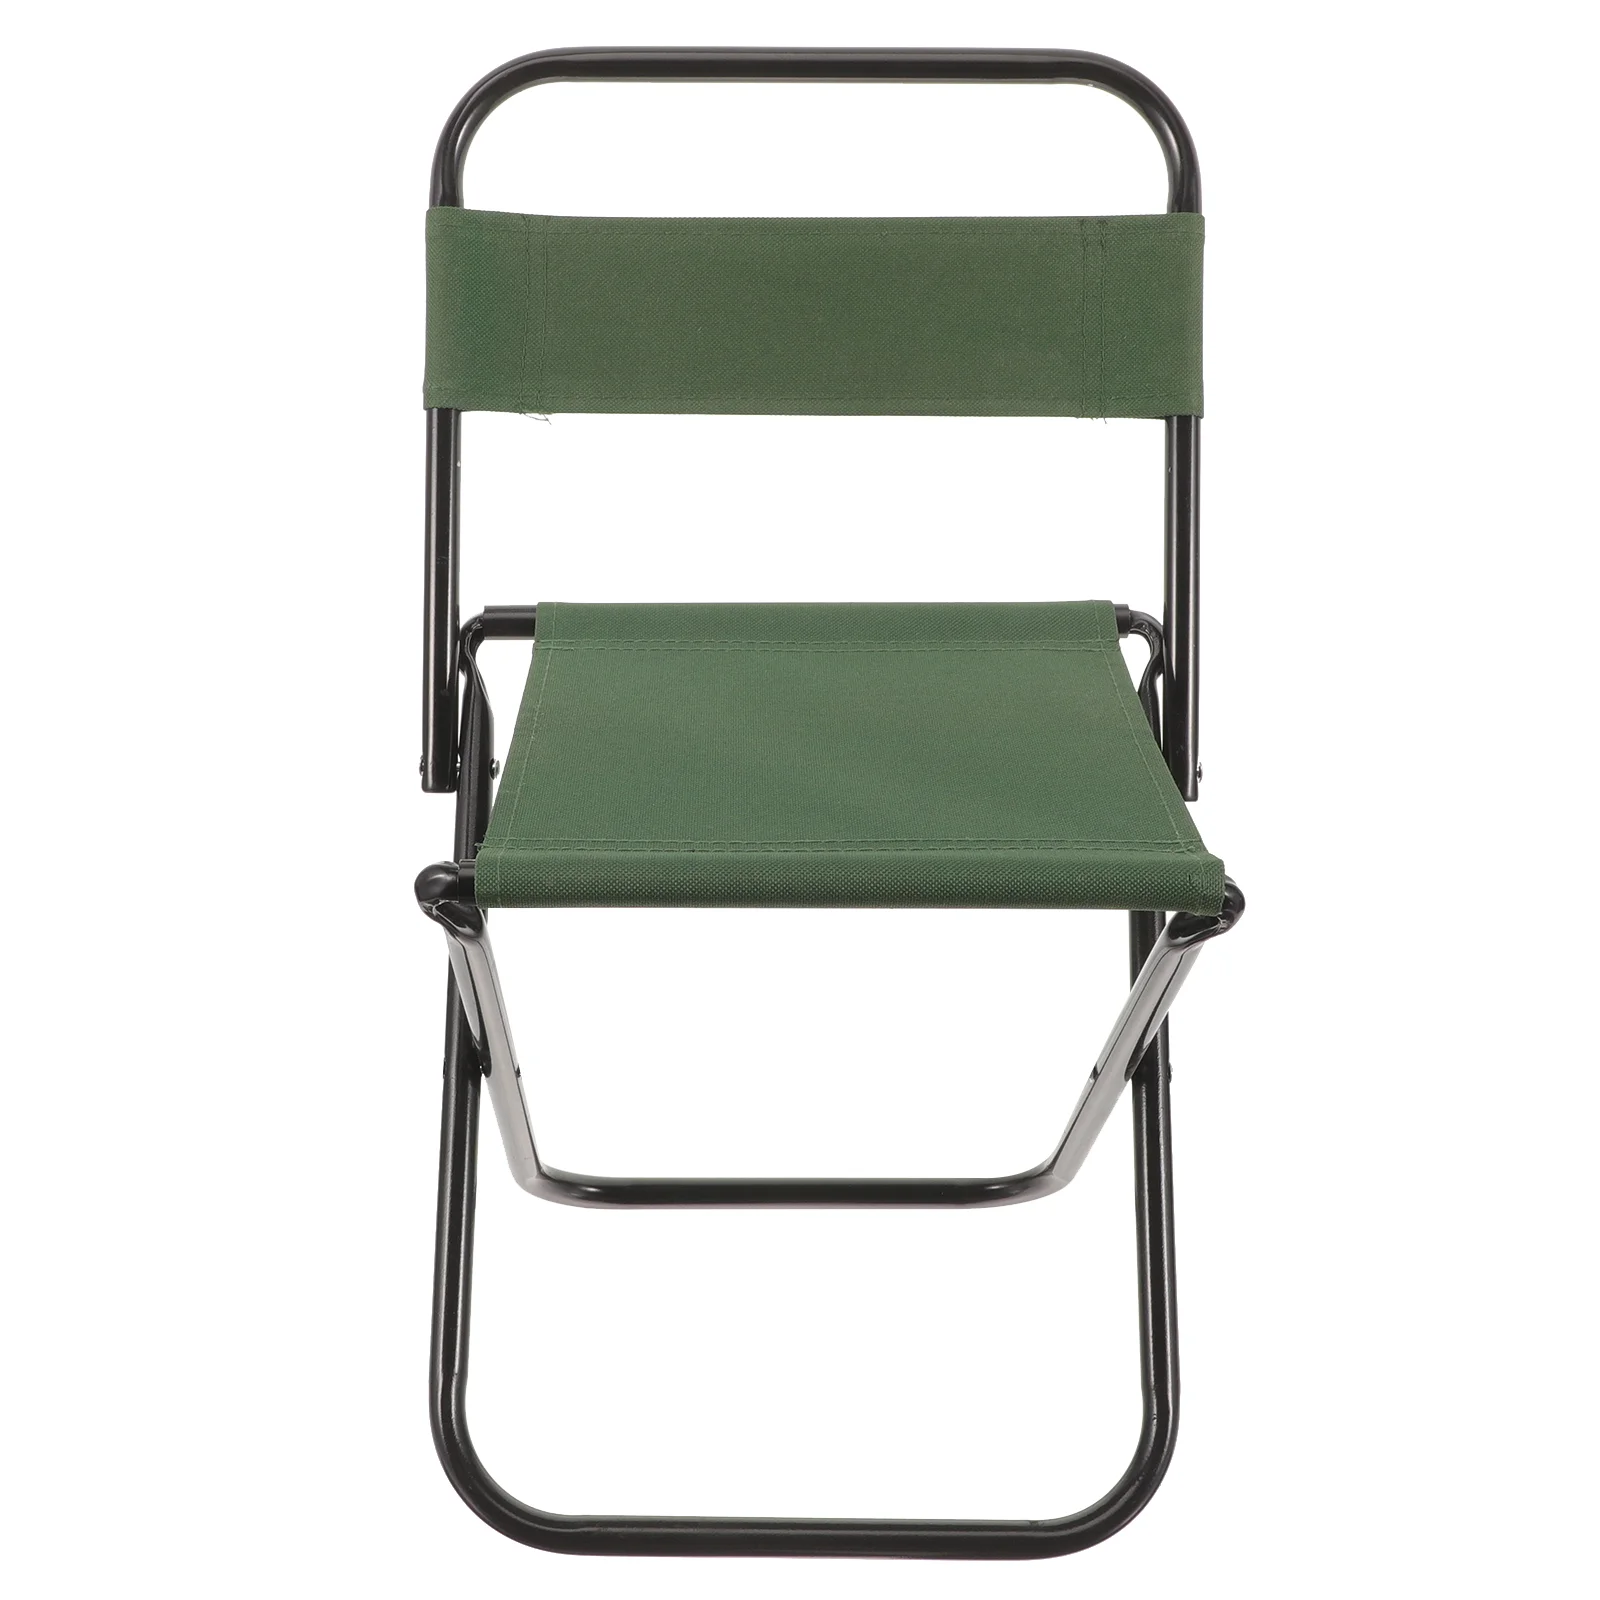 Foldable Chair Folding Portable Chairs Outdoor Stools Fishing